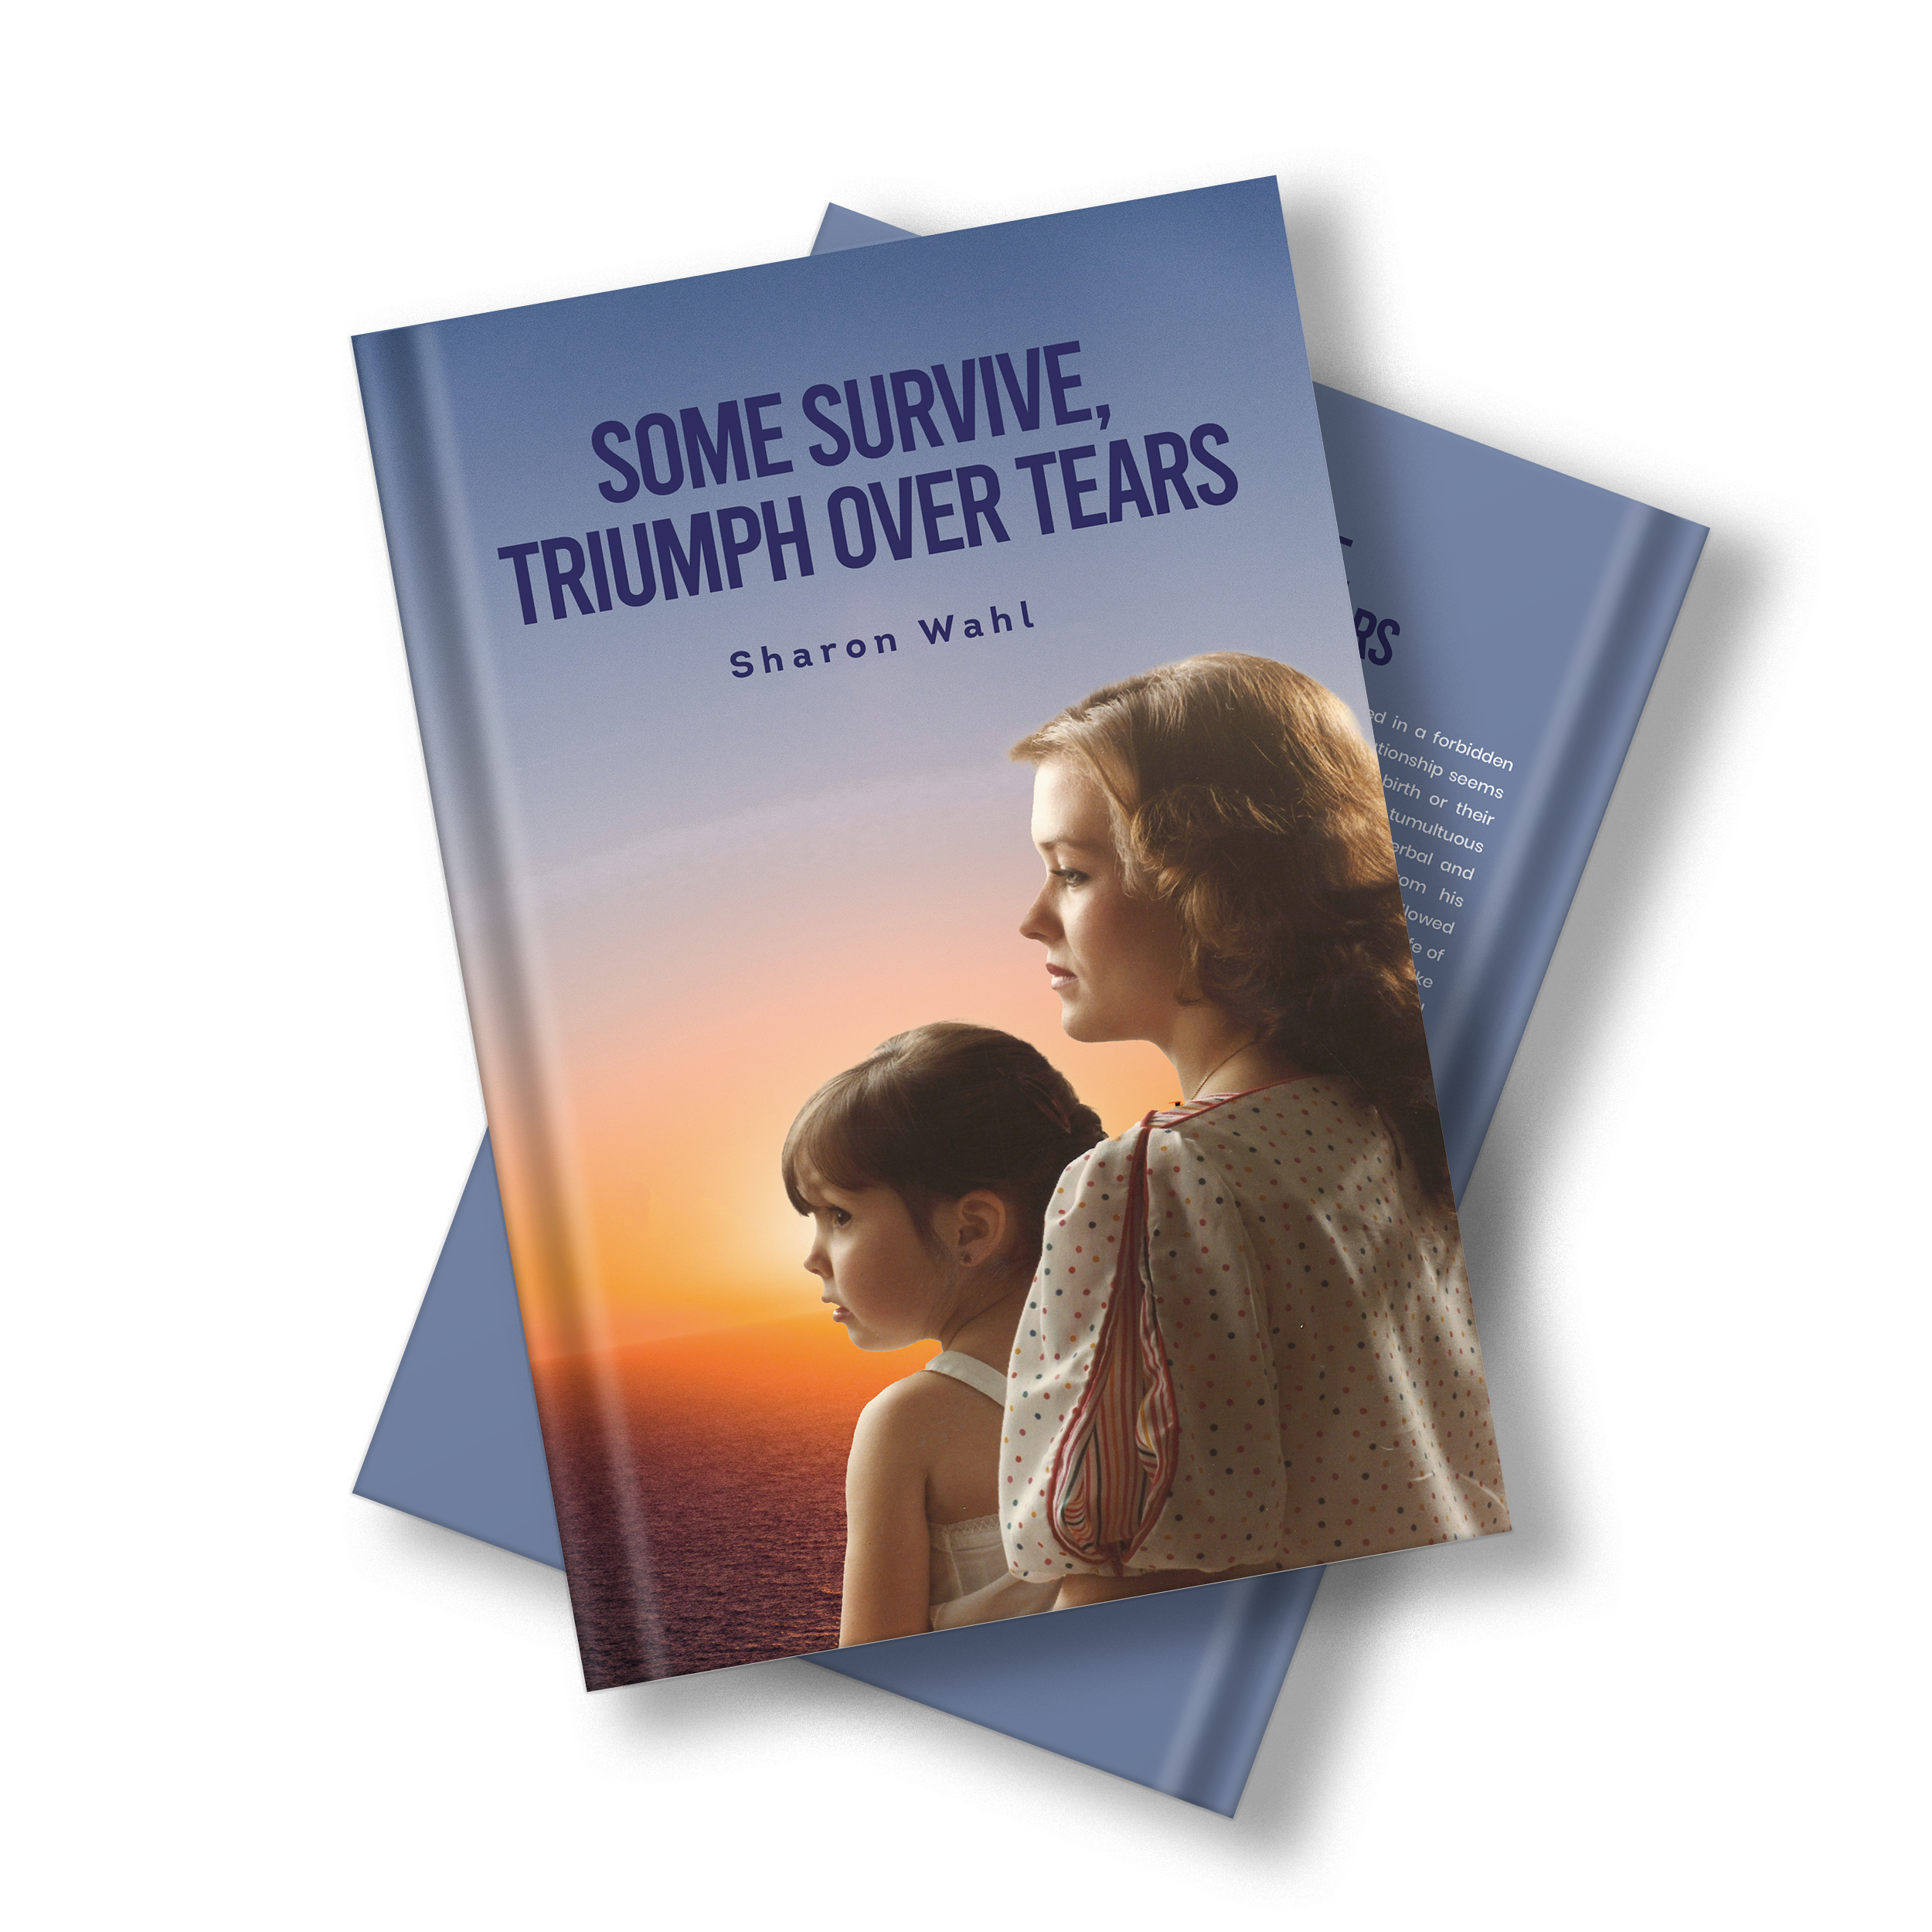 ‘Some Survive, Triumph Over Tears’ is a poignant exploration of domestic abuse and abortion. 5